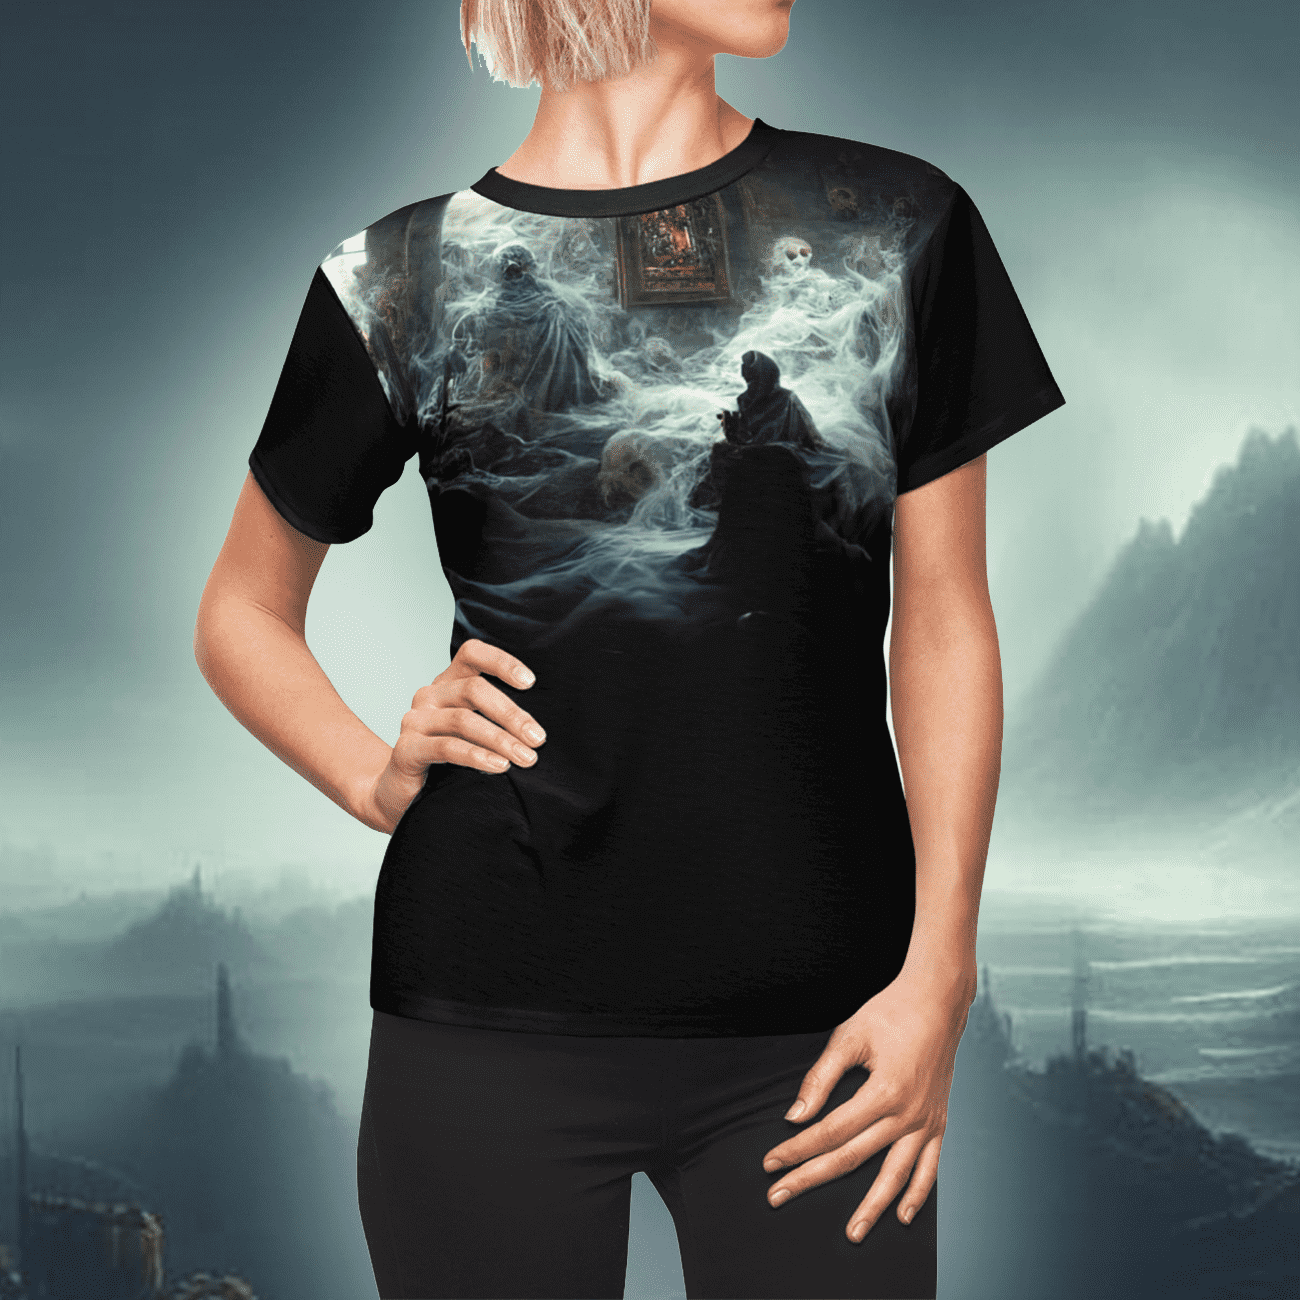 Gothic horror art t-shirt of a creepy haunted scene with ghosts in the fog, an original Horror story from The Broken Realm.